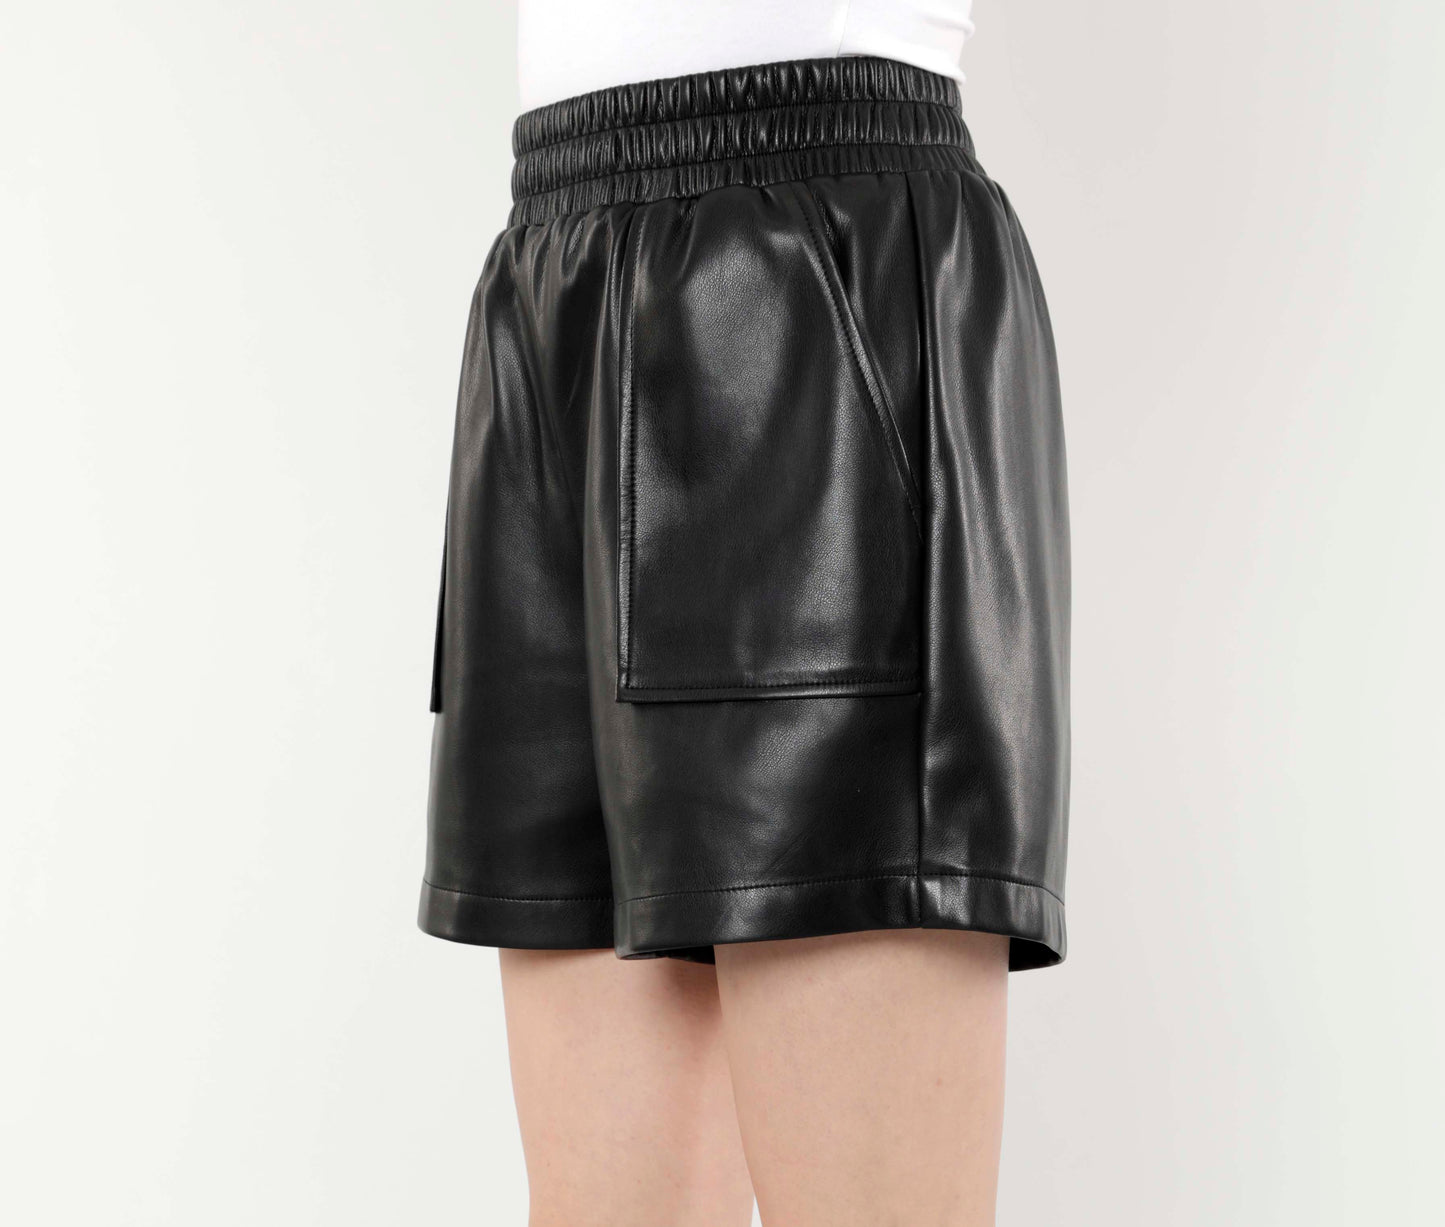 Faux High Waisted Leather Shorts